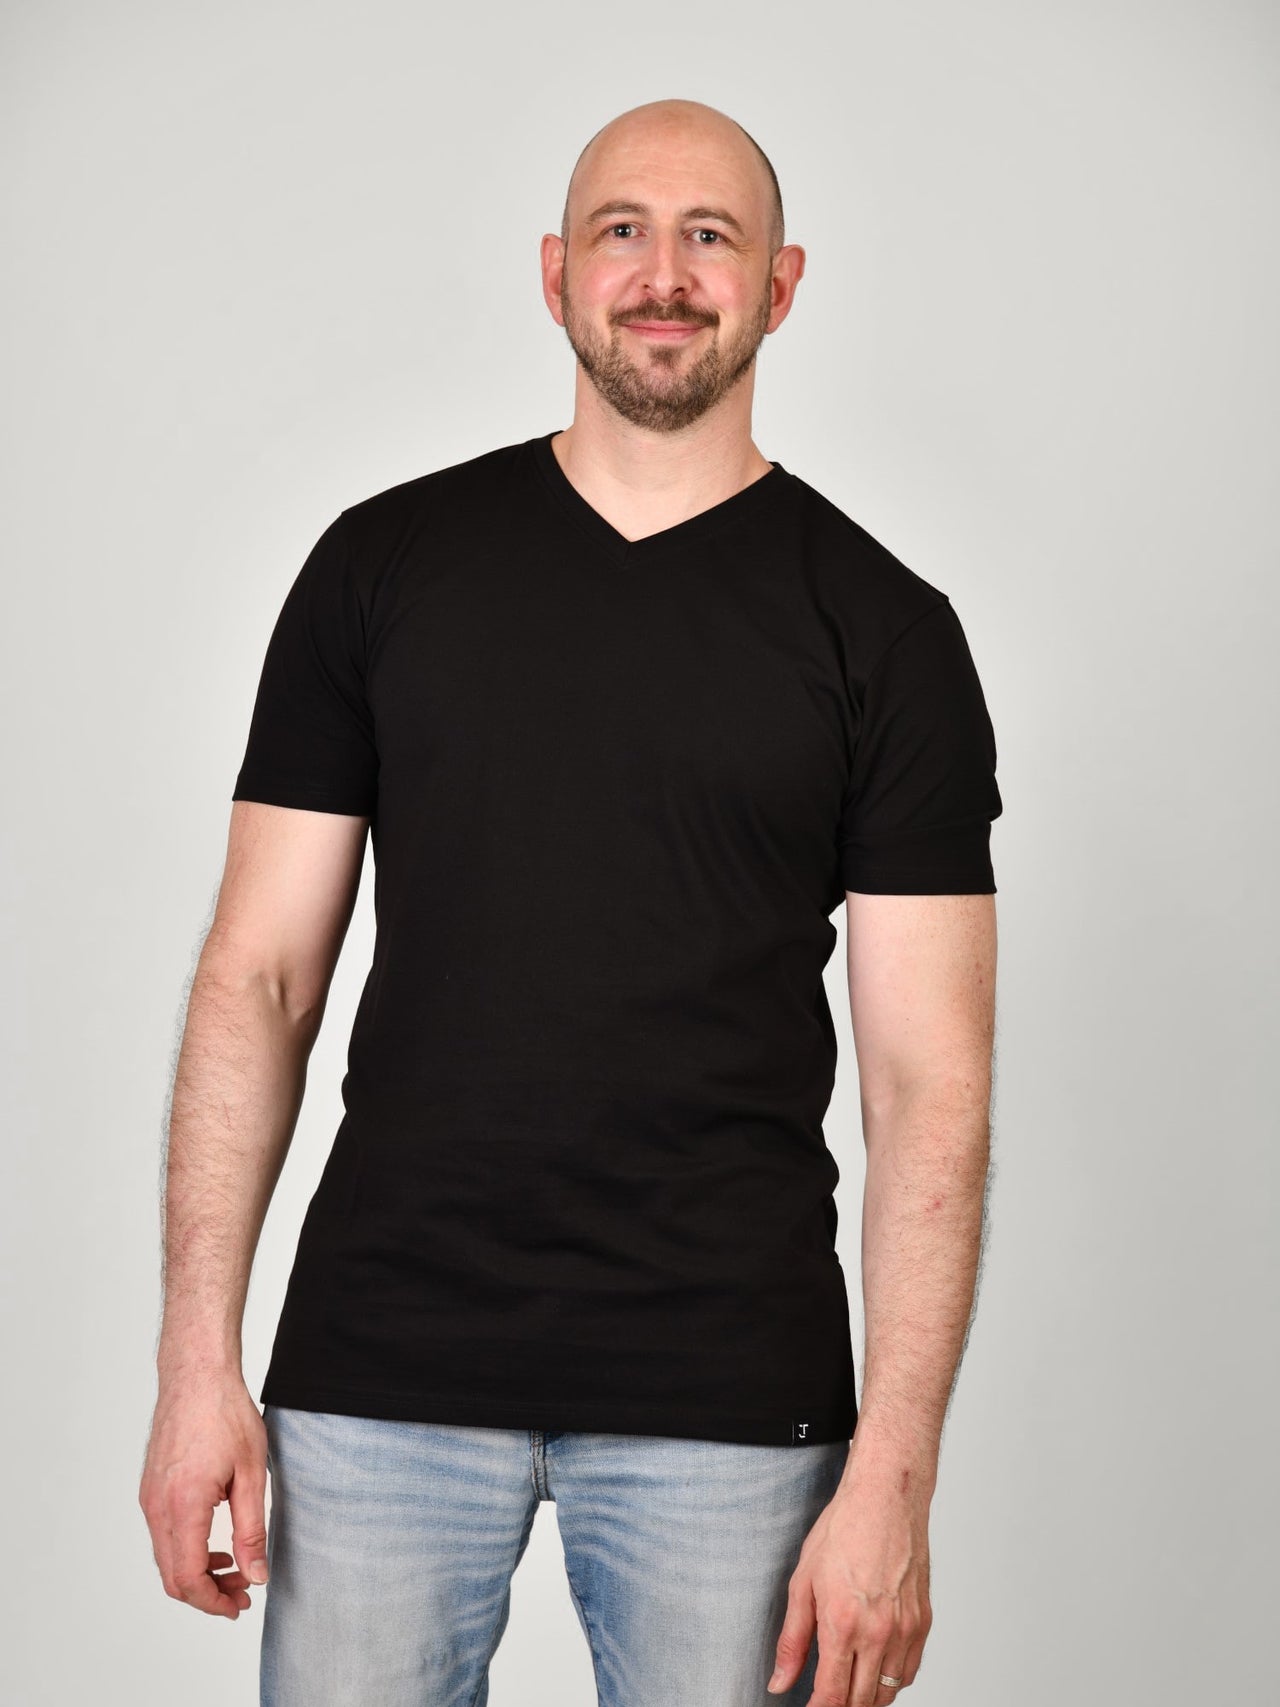 A tall and slim guy smiling in the studio and wearing a black XL tall slim v-neck t-shirt.